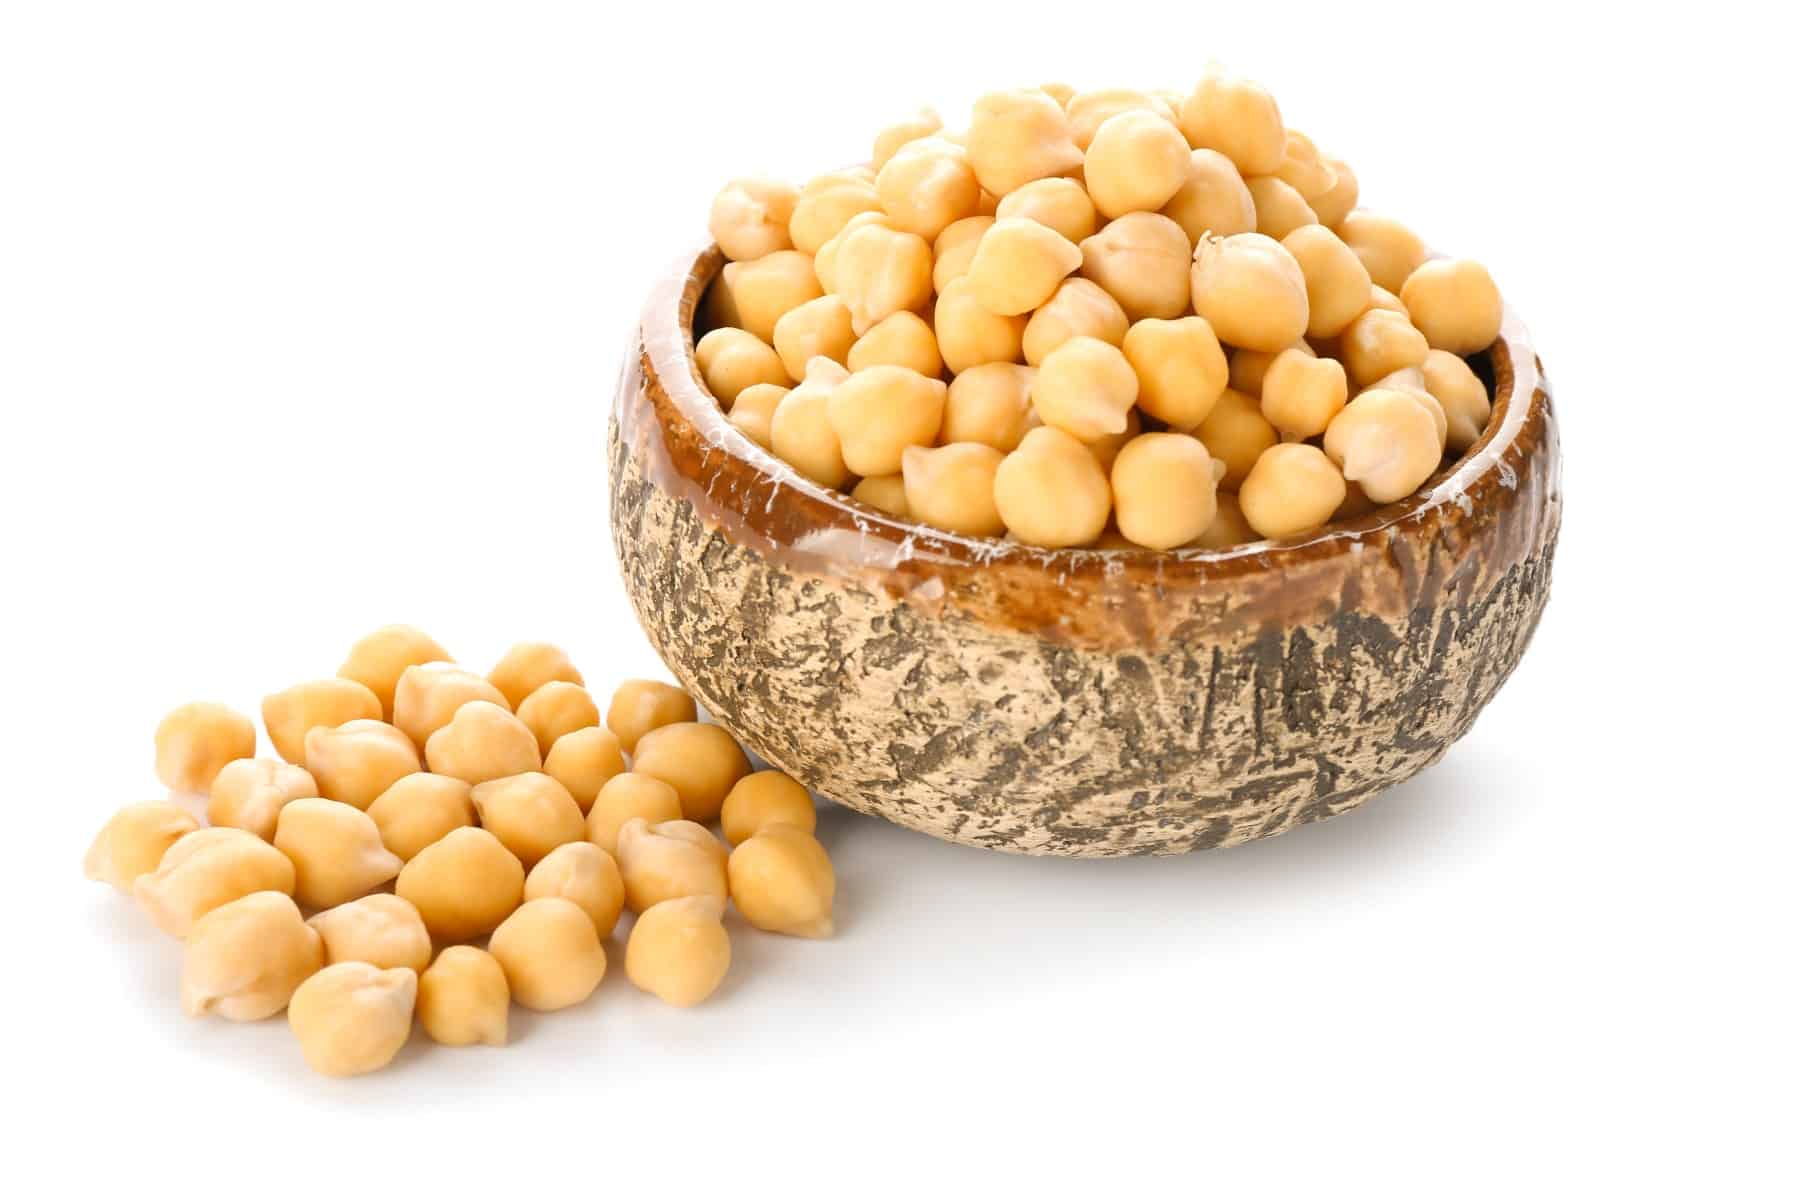 Bowl with chickpeas on white background.